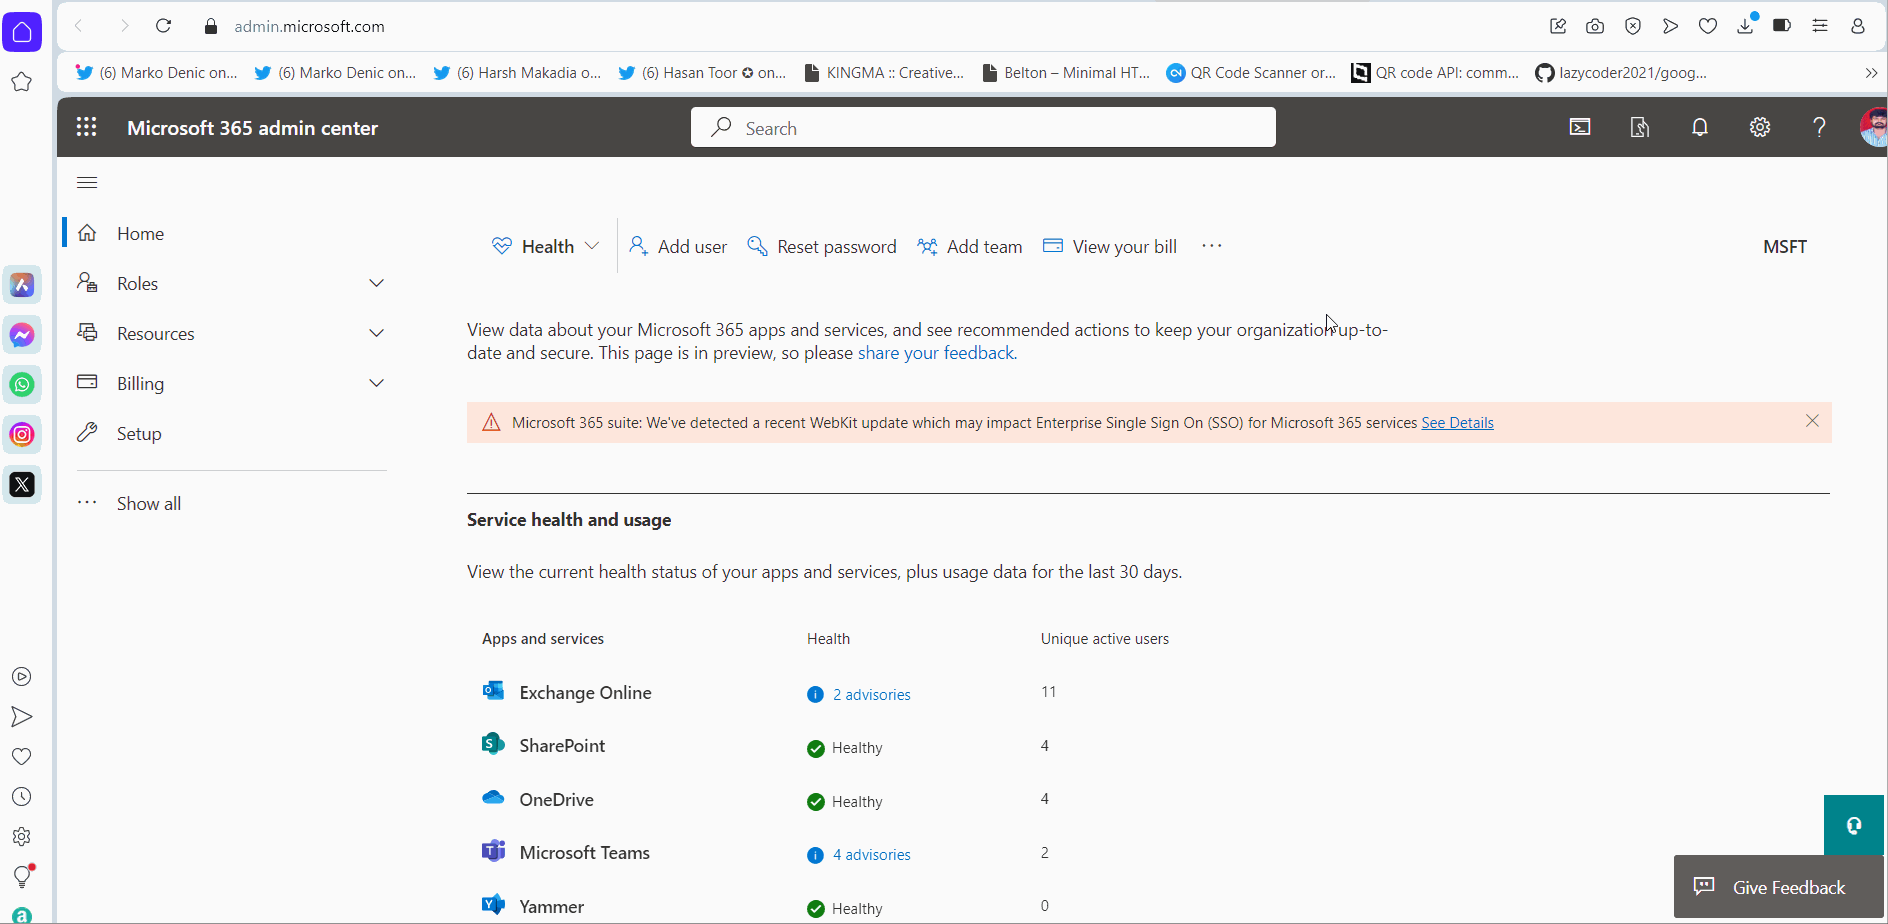 Image shows how you can access Microsoft 365 Active users page from the Microsoft 365 Admin Center navigation menu.